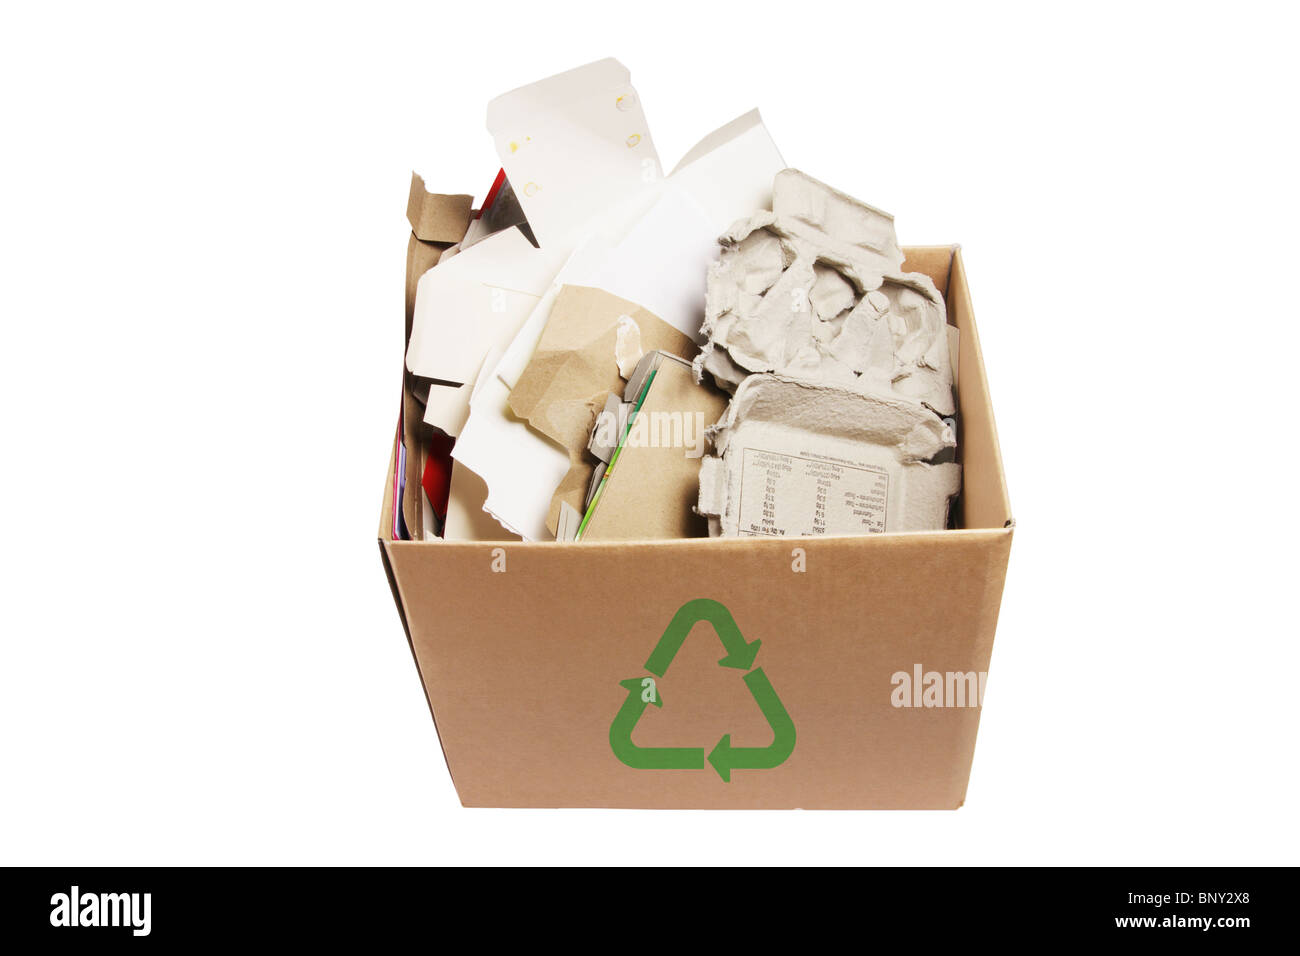 Box of Waste Papers for Recycle Stock Photo